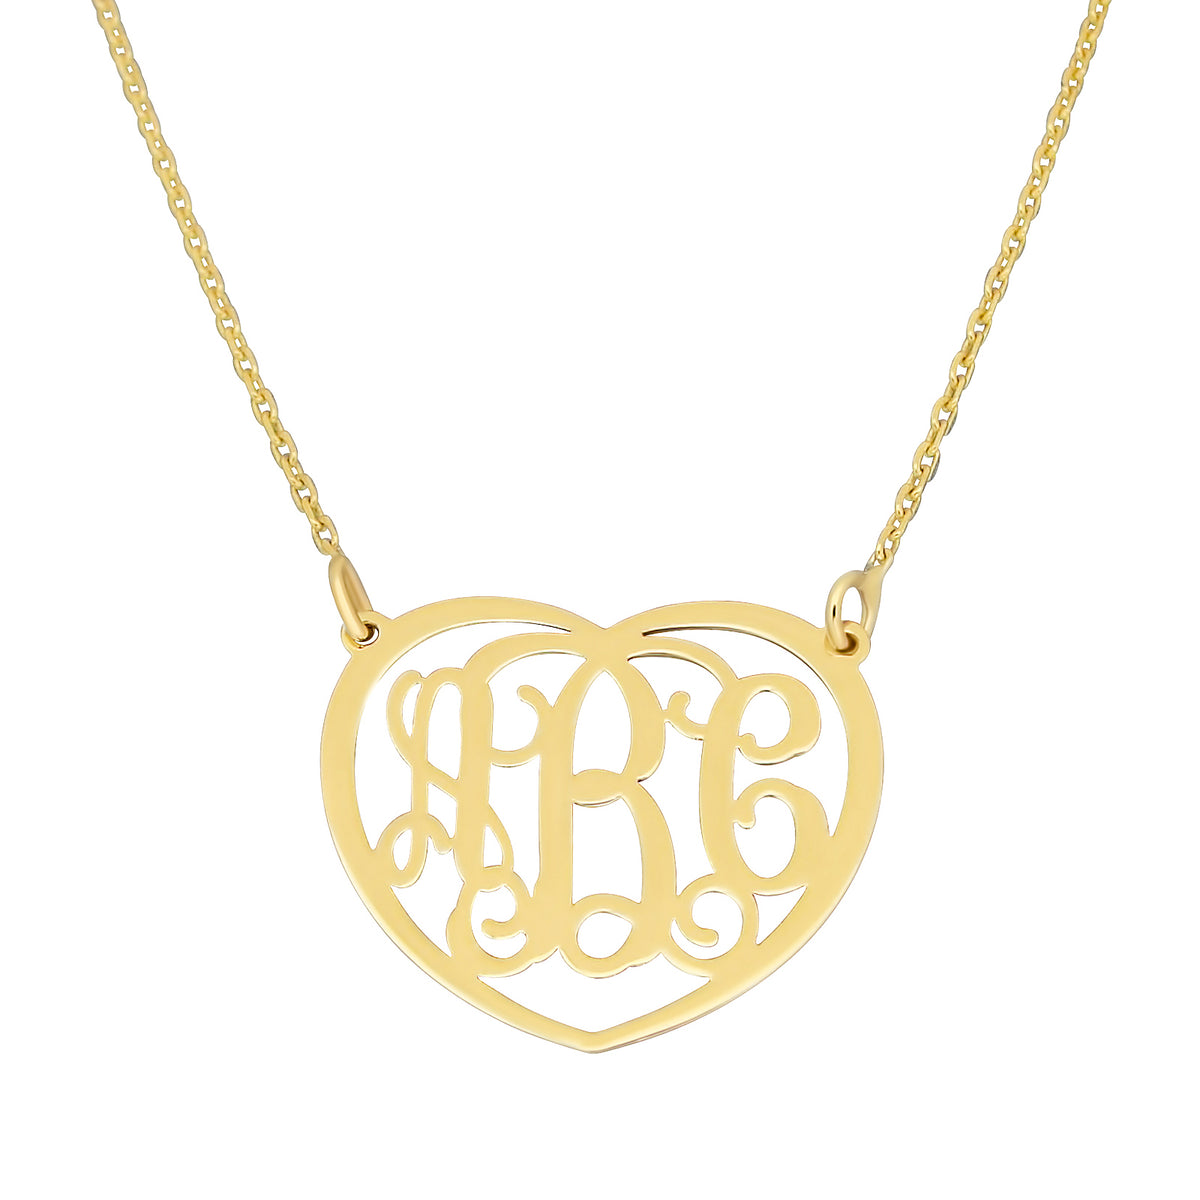 Small 10k or 14k Solid Gold 3 Initials Heart Monogram Necklace Charm 0.75 Inch Wide GM51C